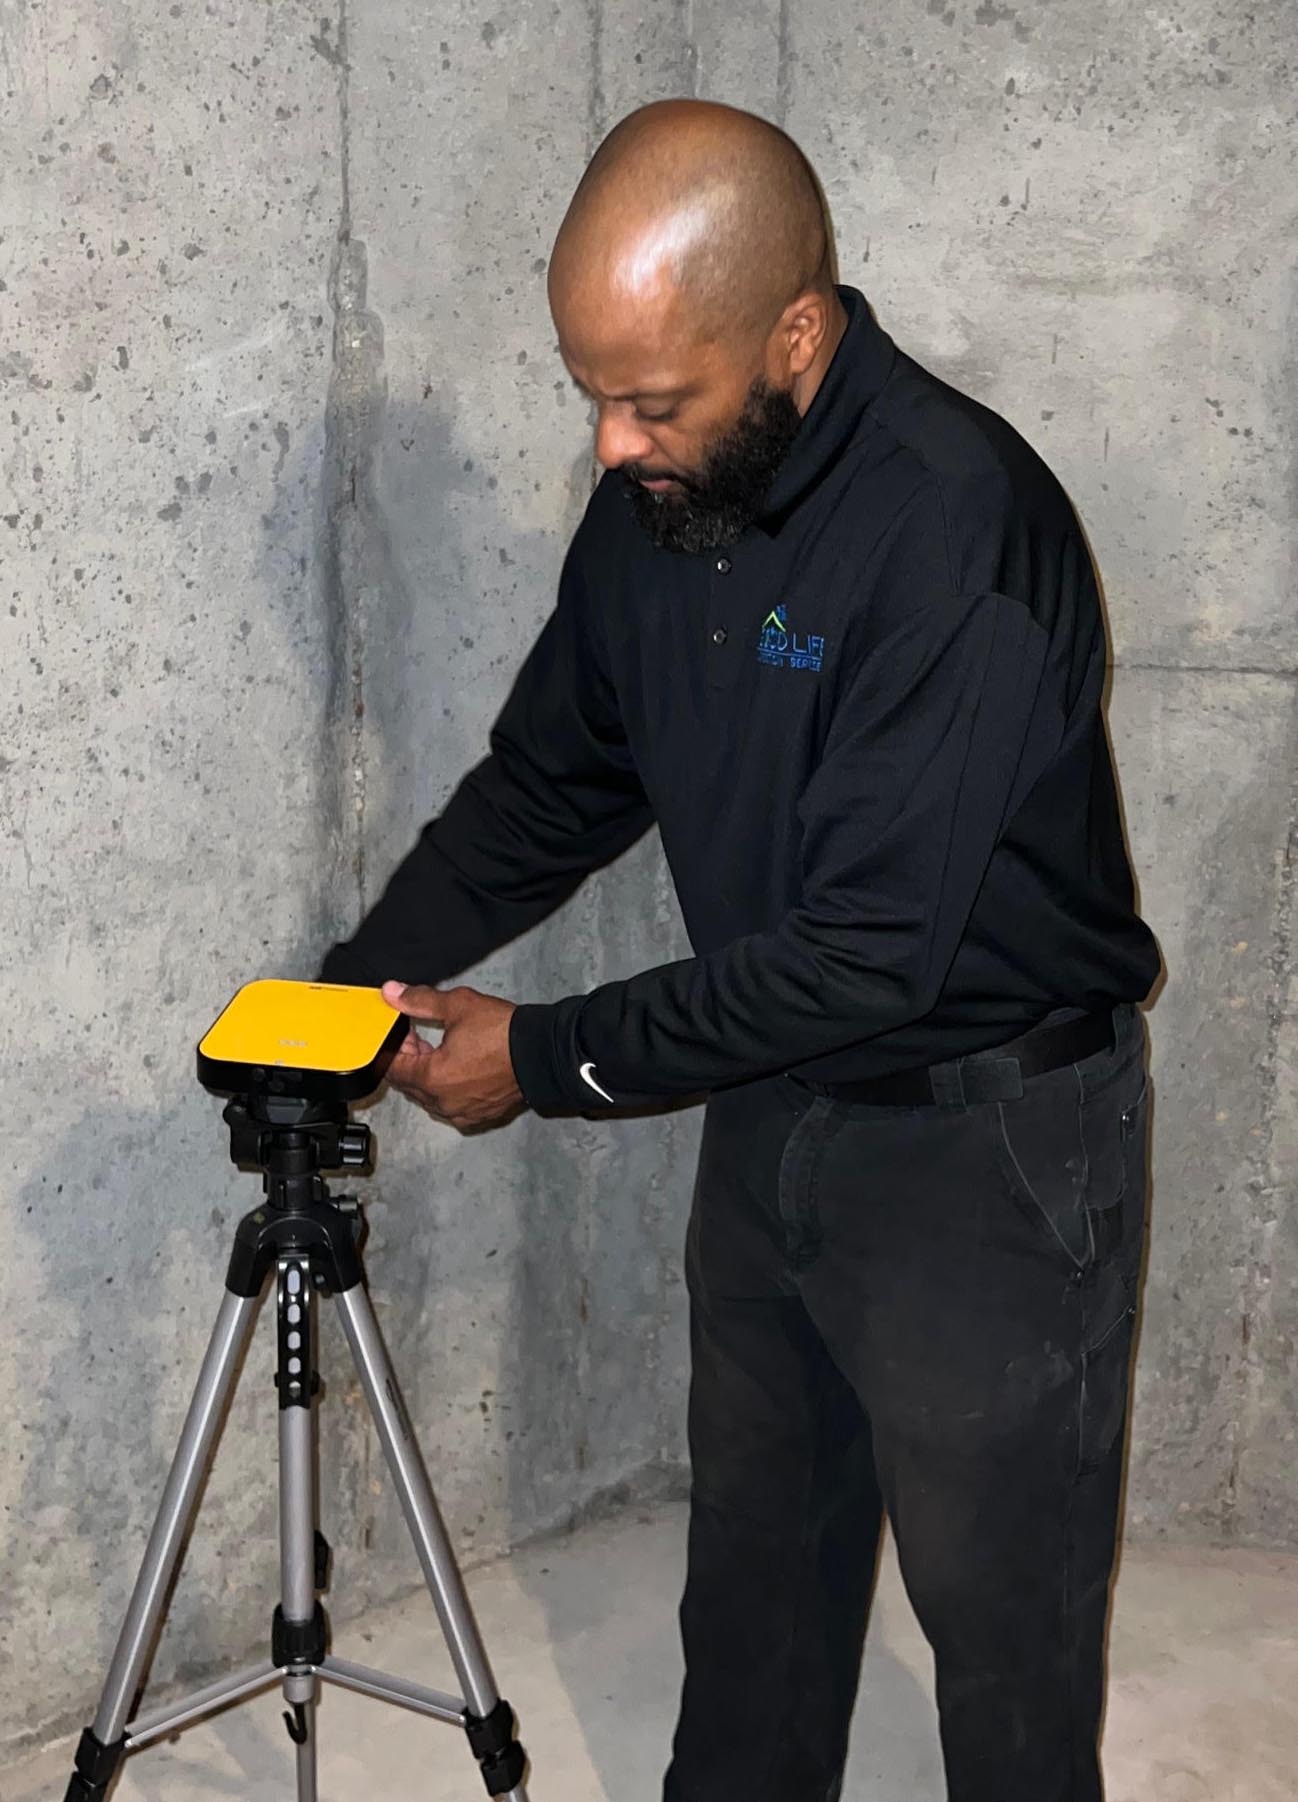 Thermal imaging services expert